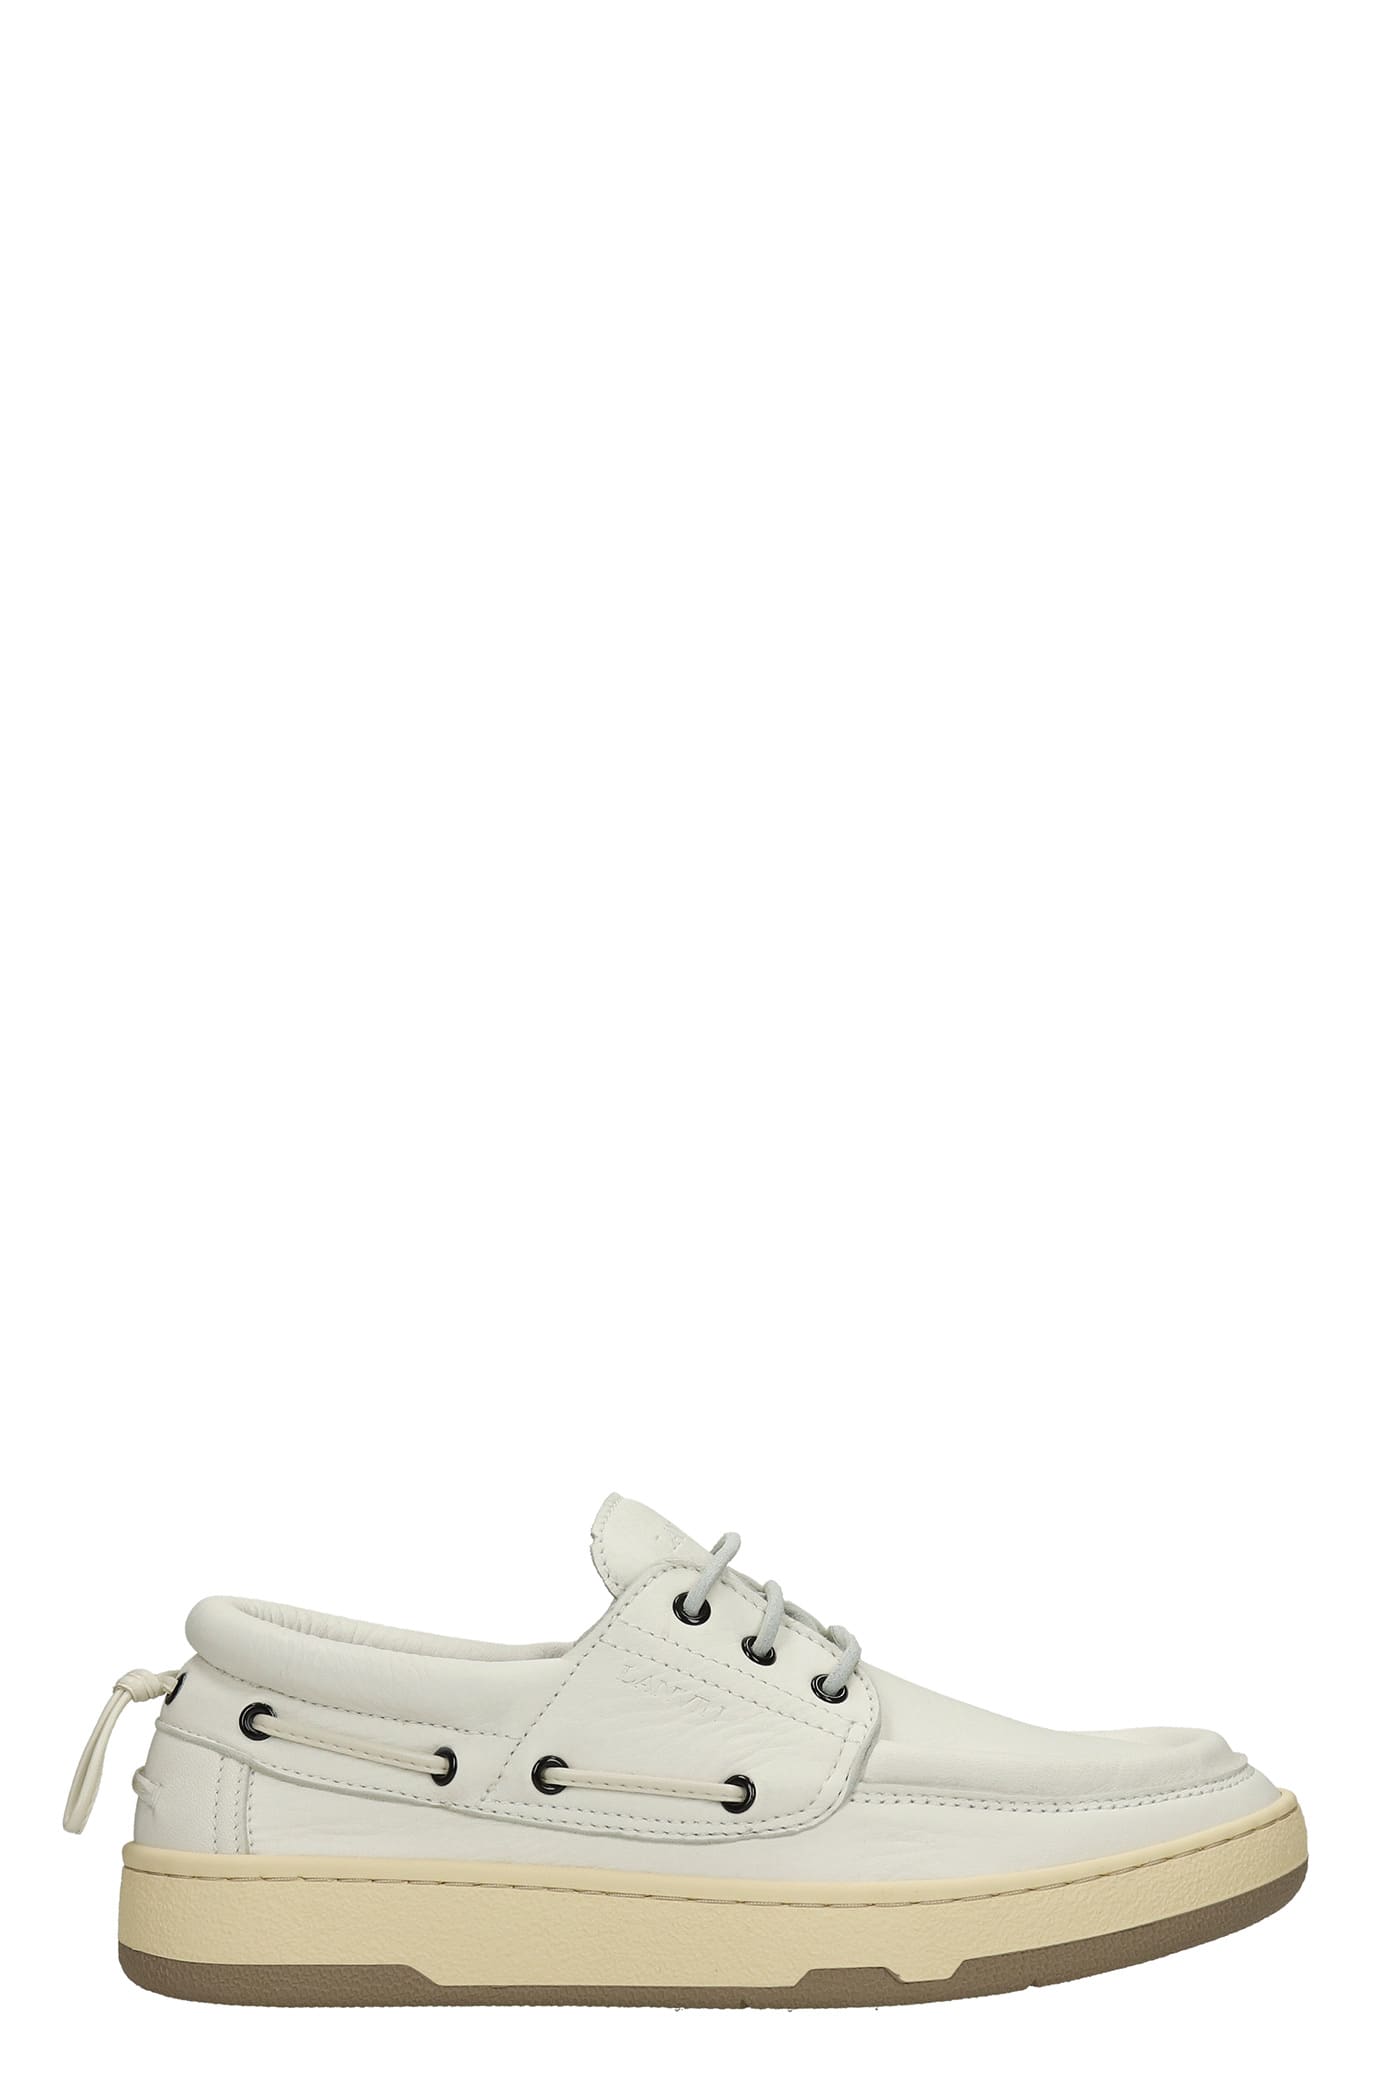 Lanvin Clay Boat Sneakers In White Leather